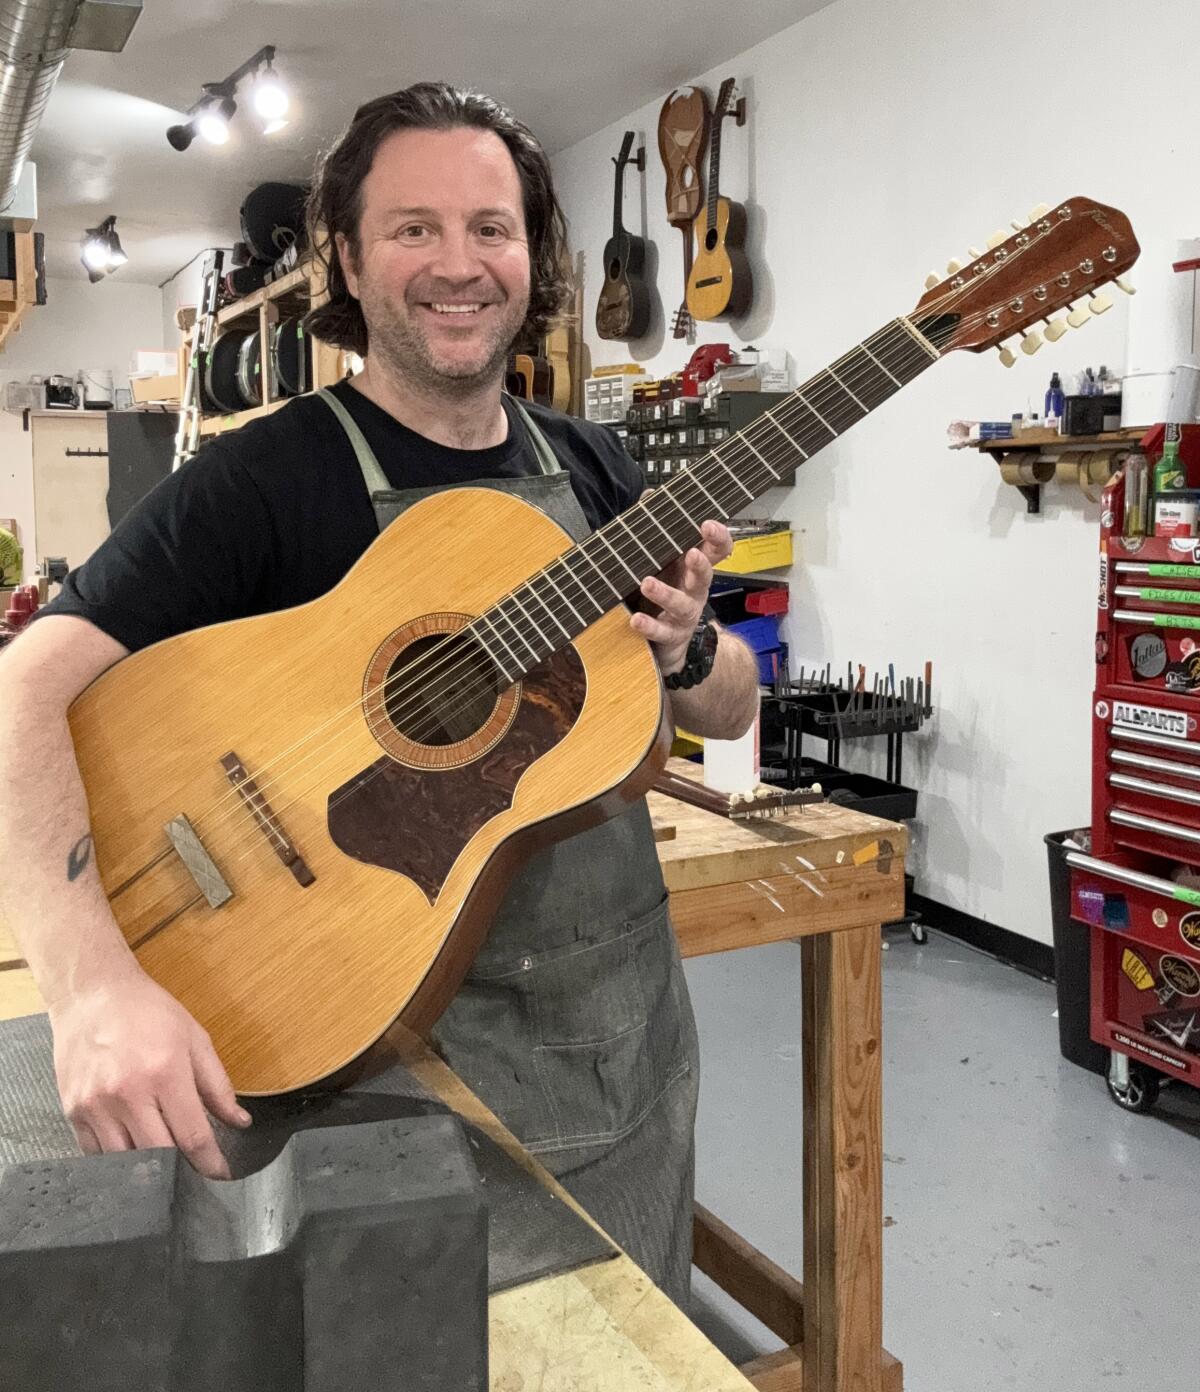 Ryan Schuermann got a call from Julien's Auction House about a 12-string acoustic guitar in need of restoration.